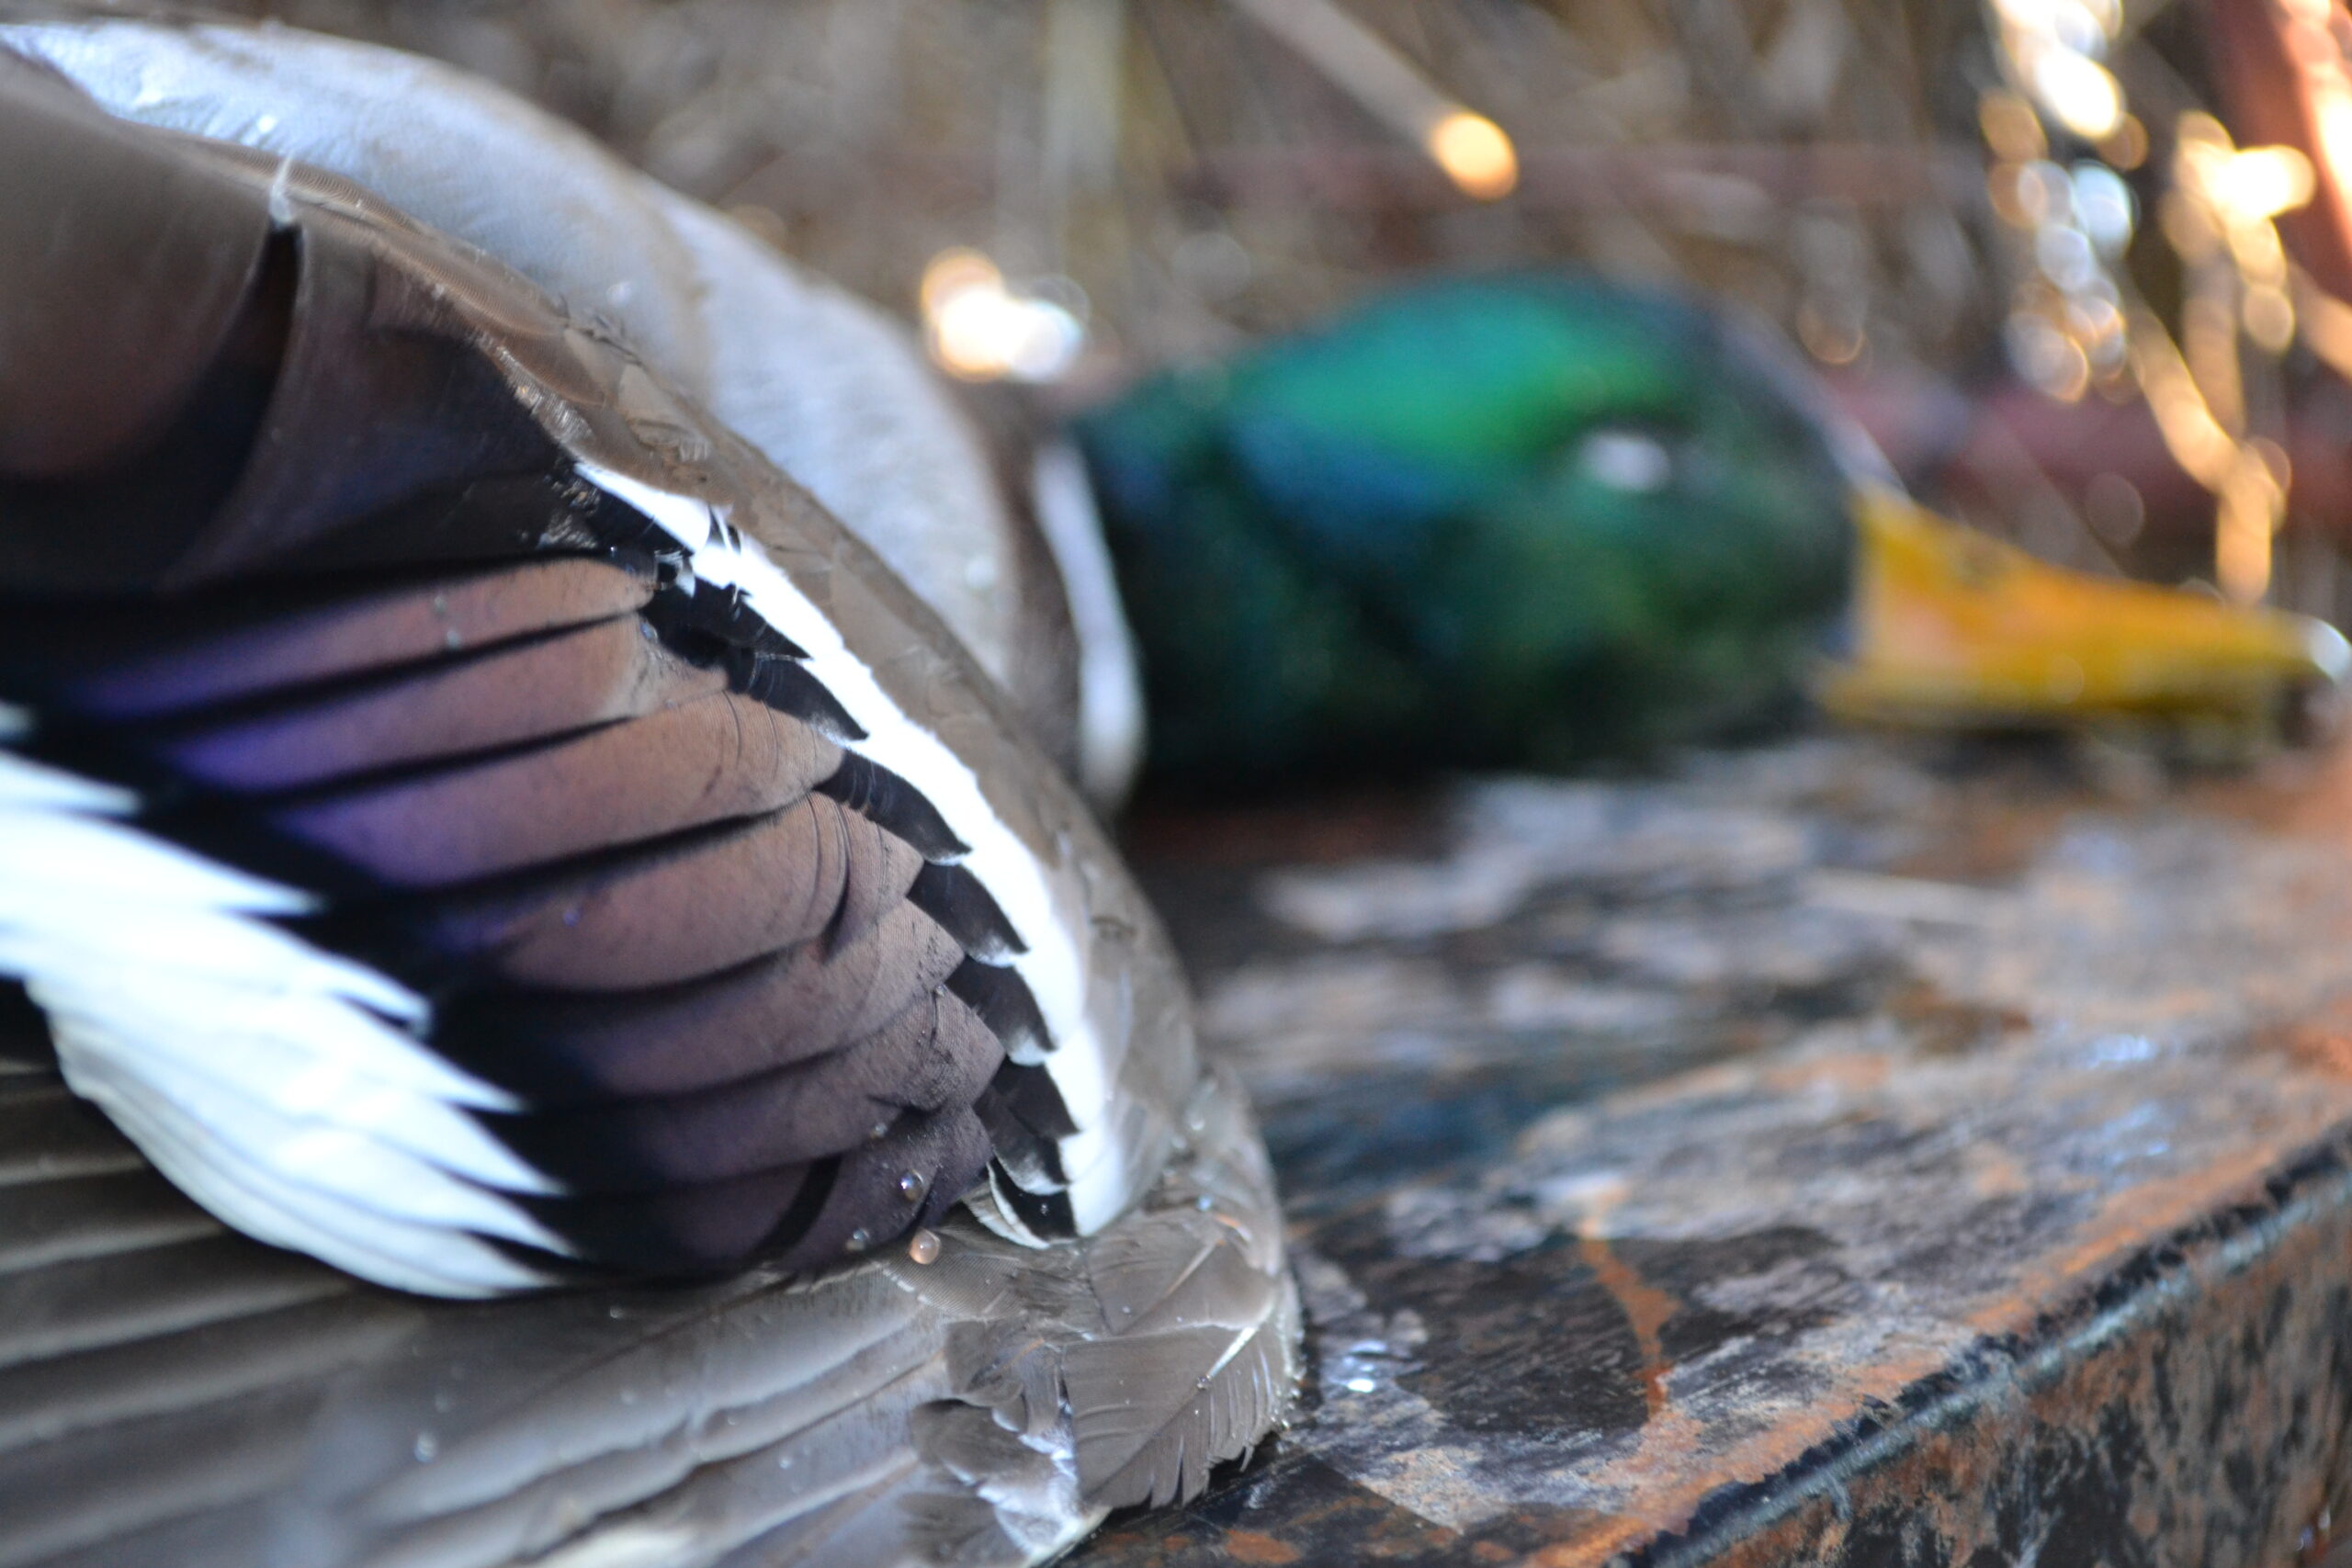 Not all eastern greenheads are actually mallards.